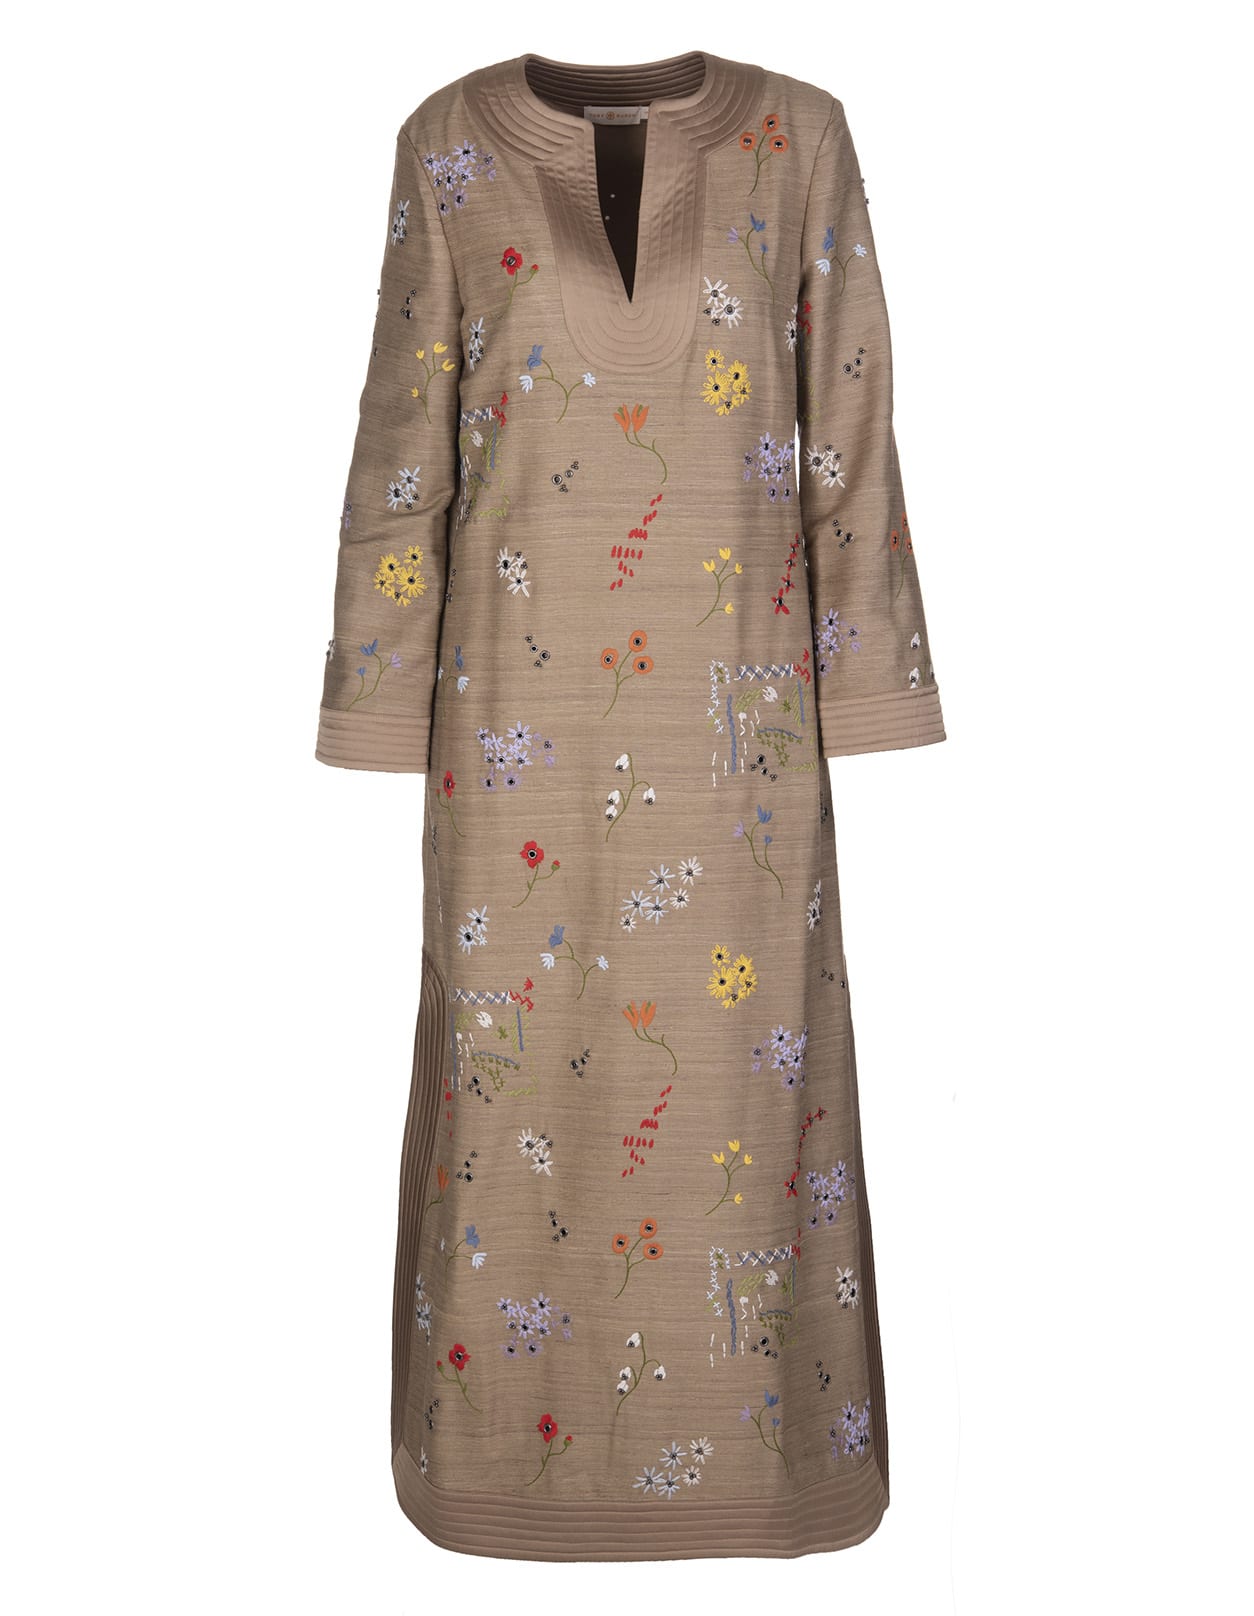 Tory Burch Khaki Caftan With Embroidered Wildflowers